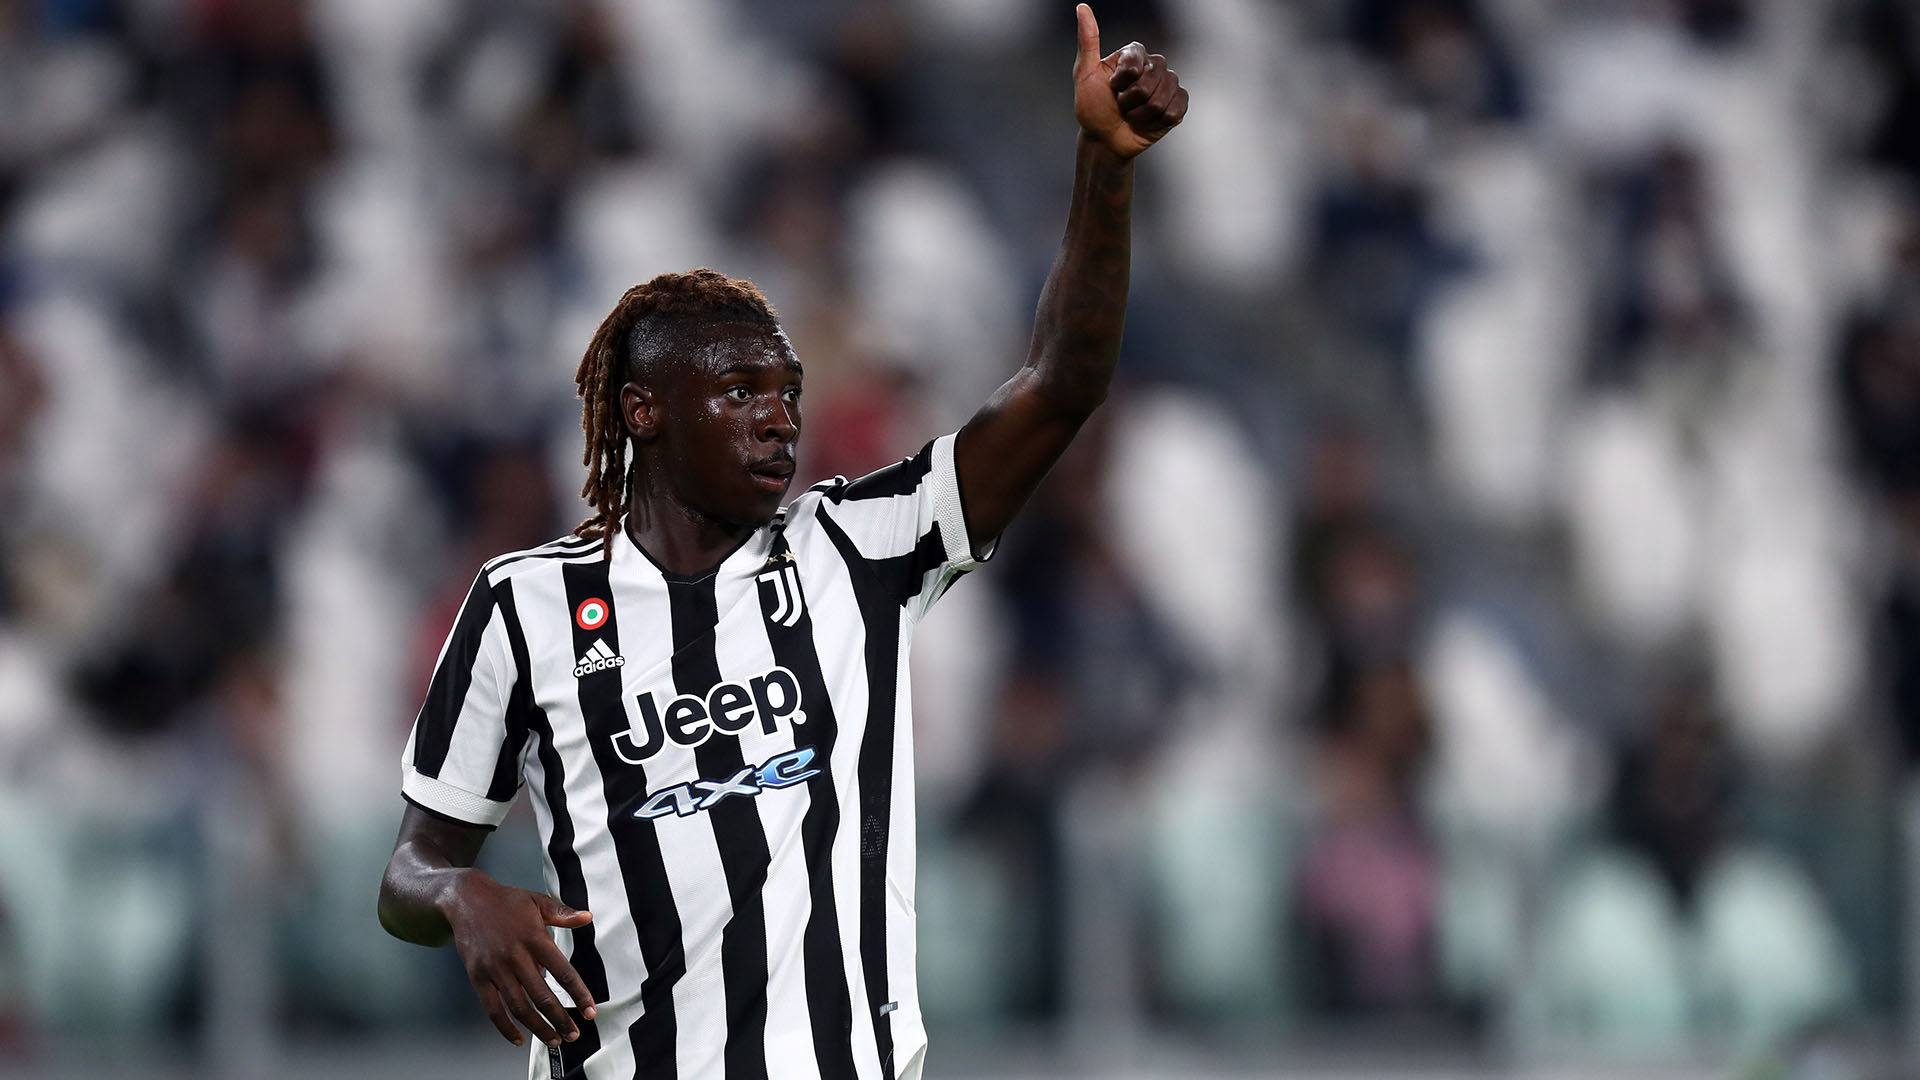 Moise Kean is likely to get his wish to leave Juventus and join Atletico Madrid, which were the top destination in his mind.